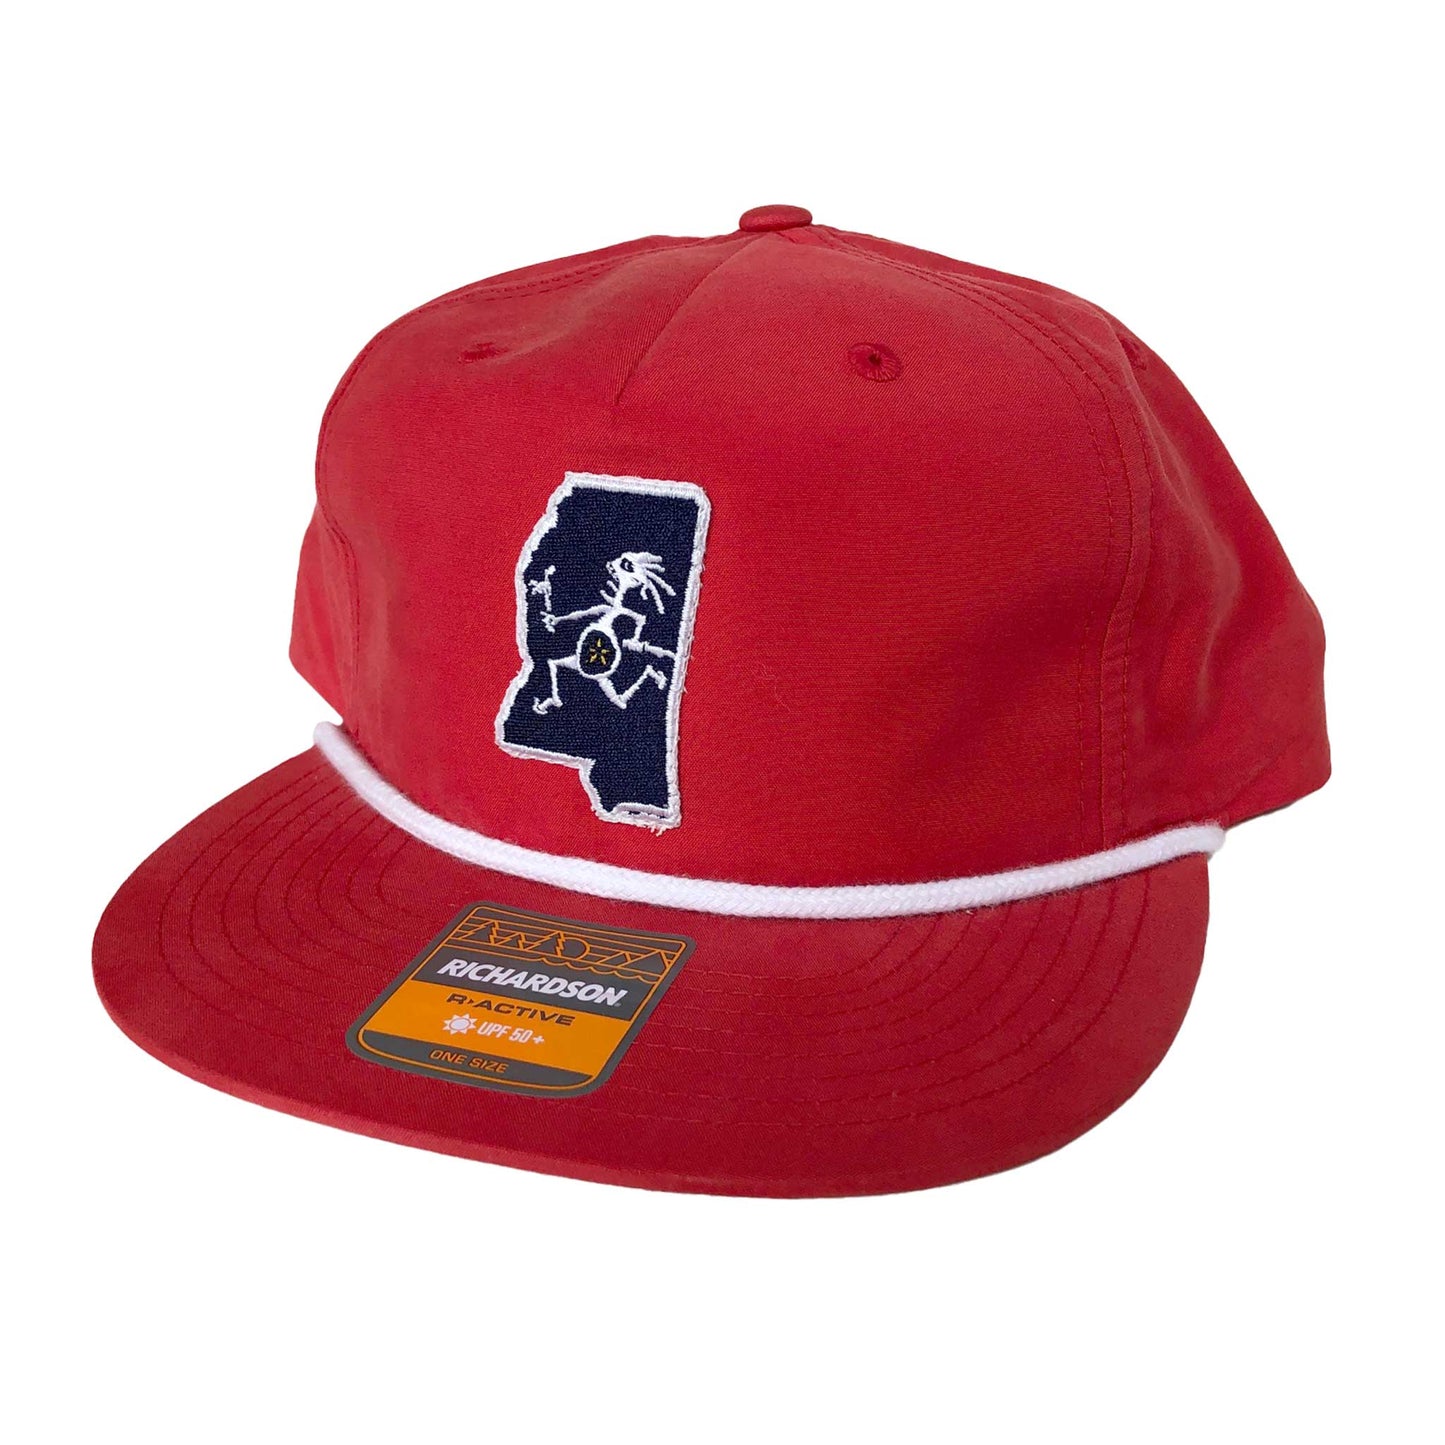 Mississippi Note Eater Rope Hat